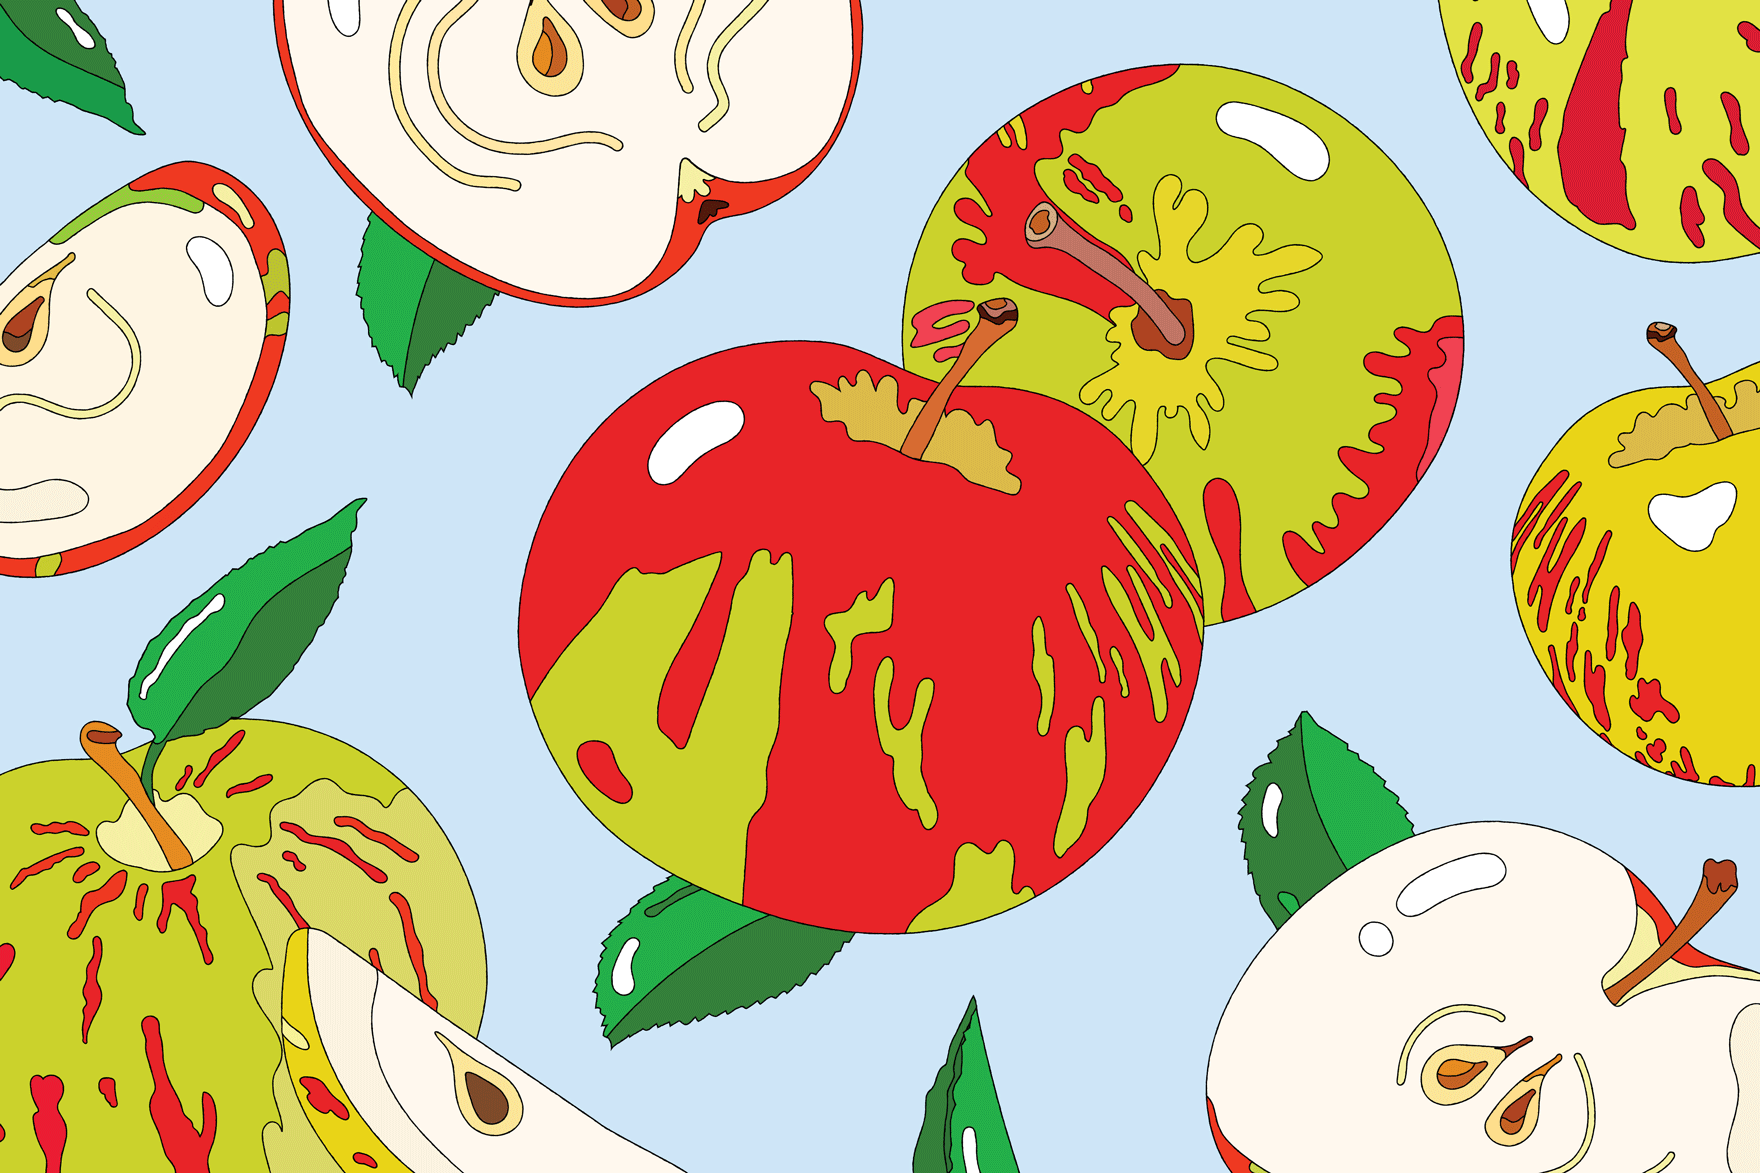 An illustration of apples